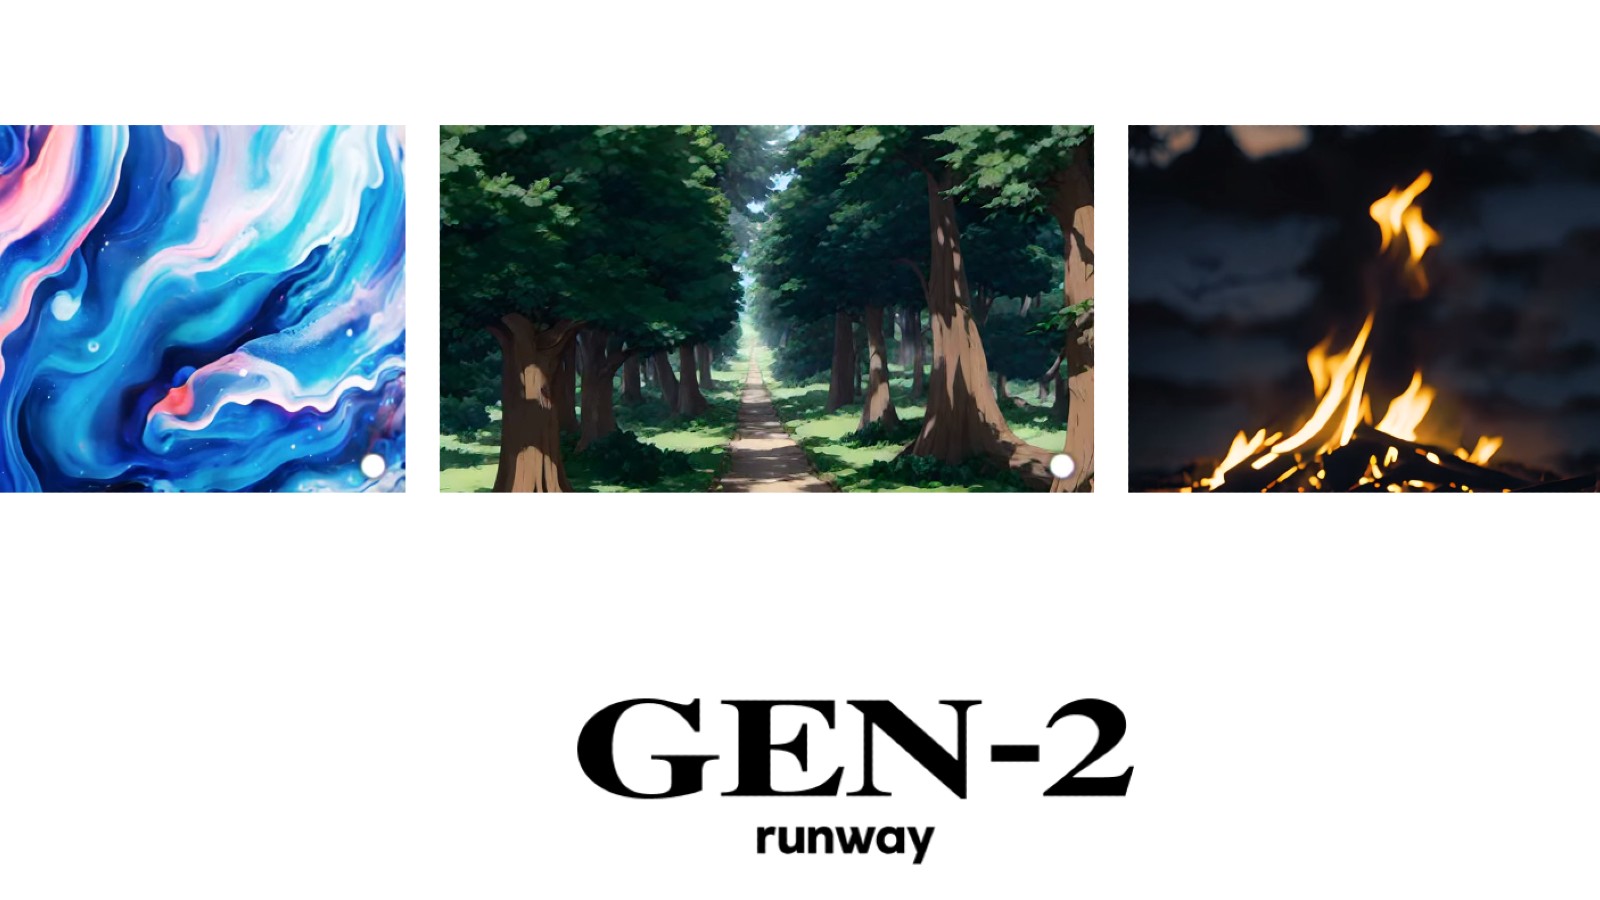 Runway Gen-2 AI model can quickly turn any picture into video in